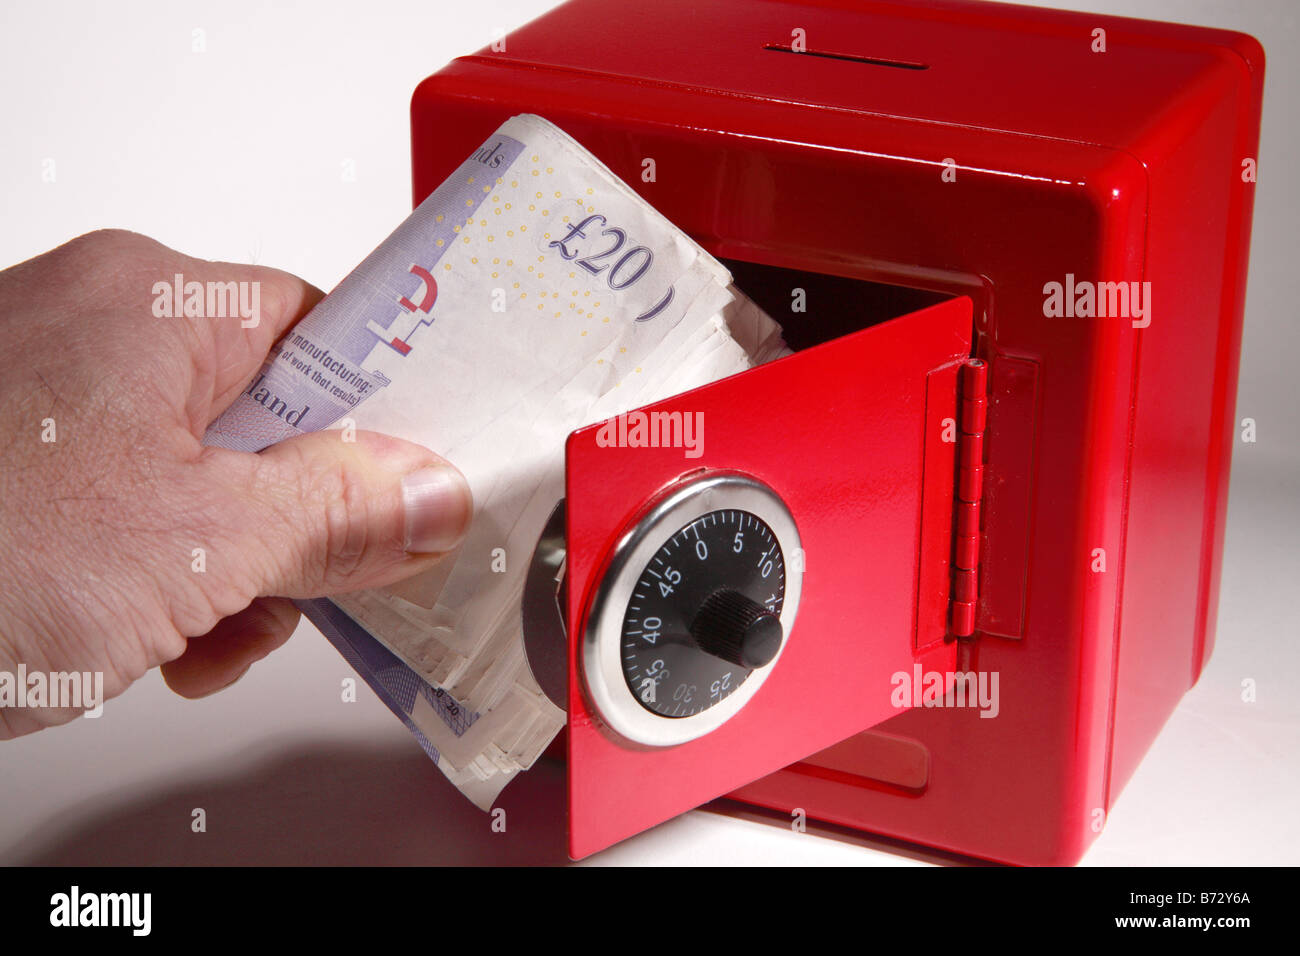 red safe cash money combination credit crunch keeping box bank saving rainy day save hide tax deposit pound £ currency Stock Photo